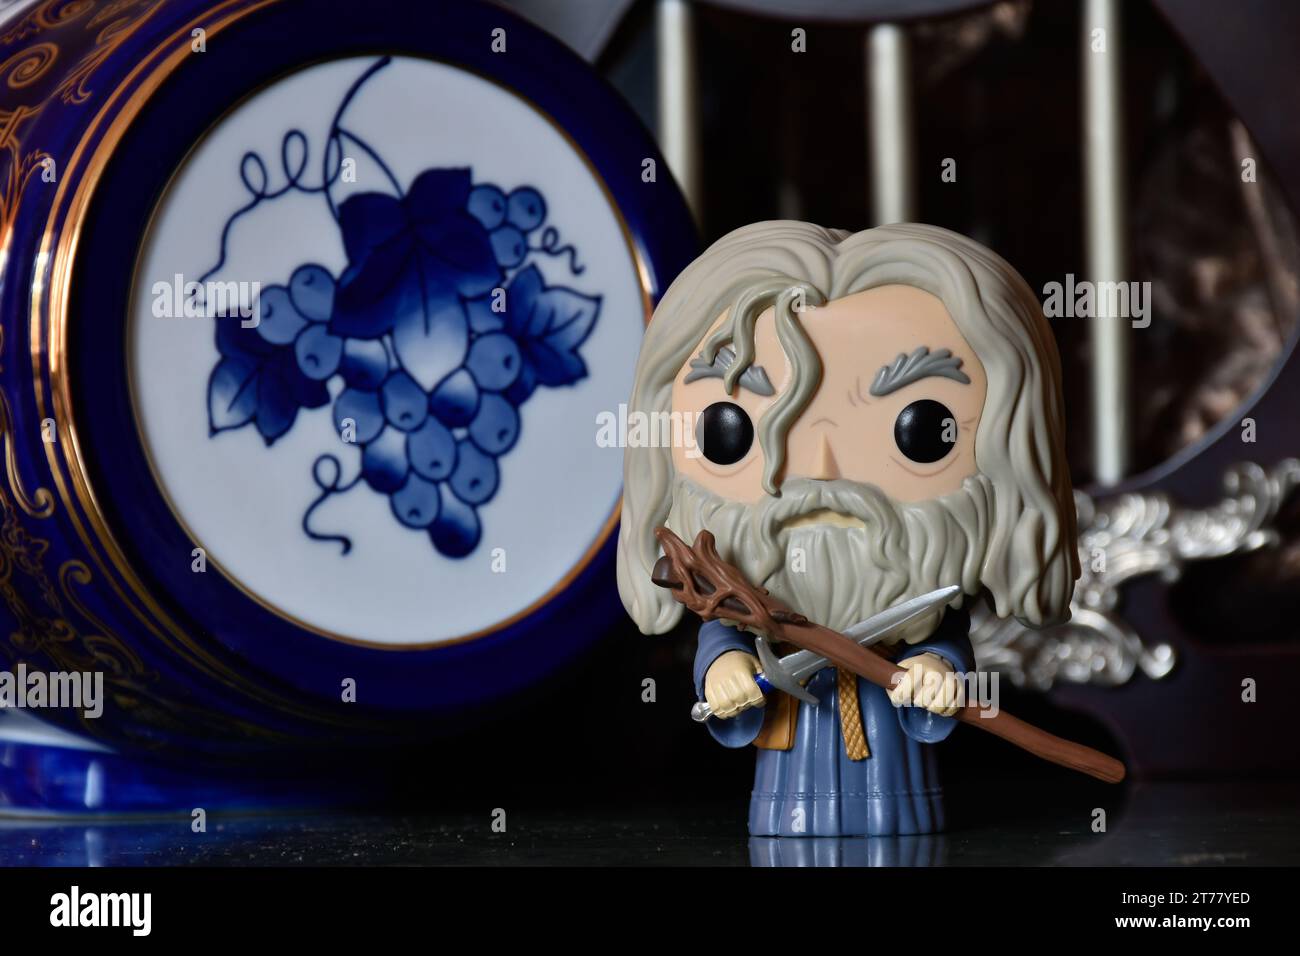 Funko Pop action figure of wizard Gandalf the Grey from fantasy movie The Lord of the Rings. Dark ancient palace with columns, porcelain blue keg. Stock Photo